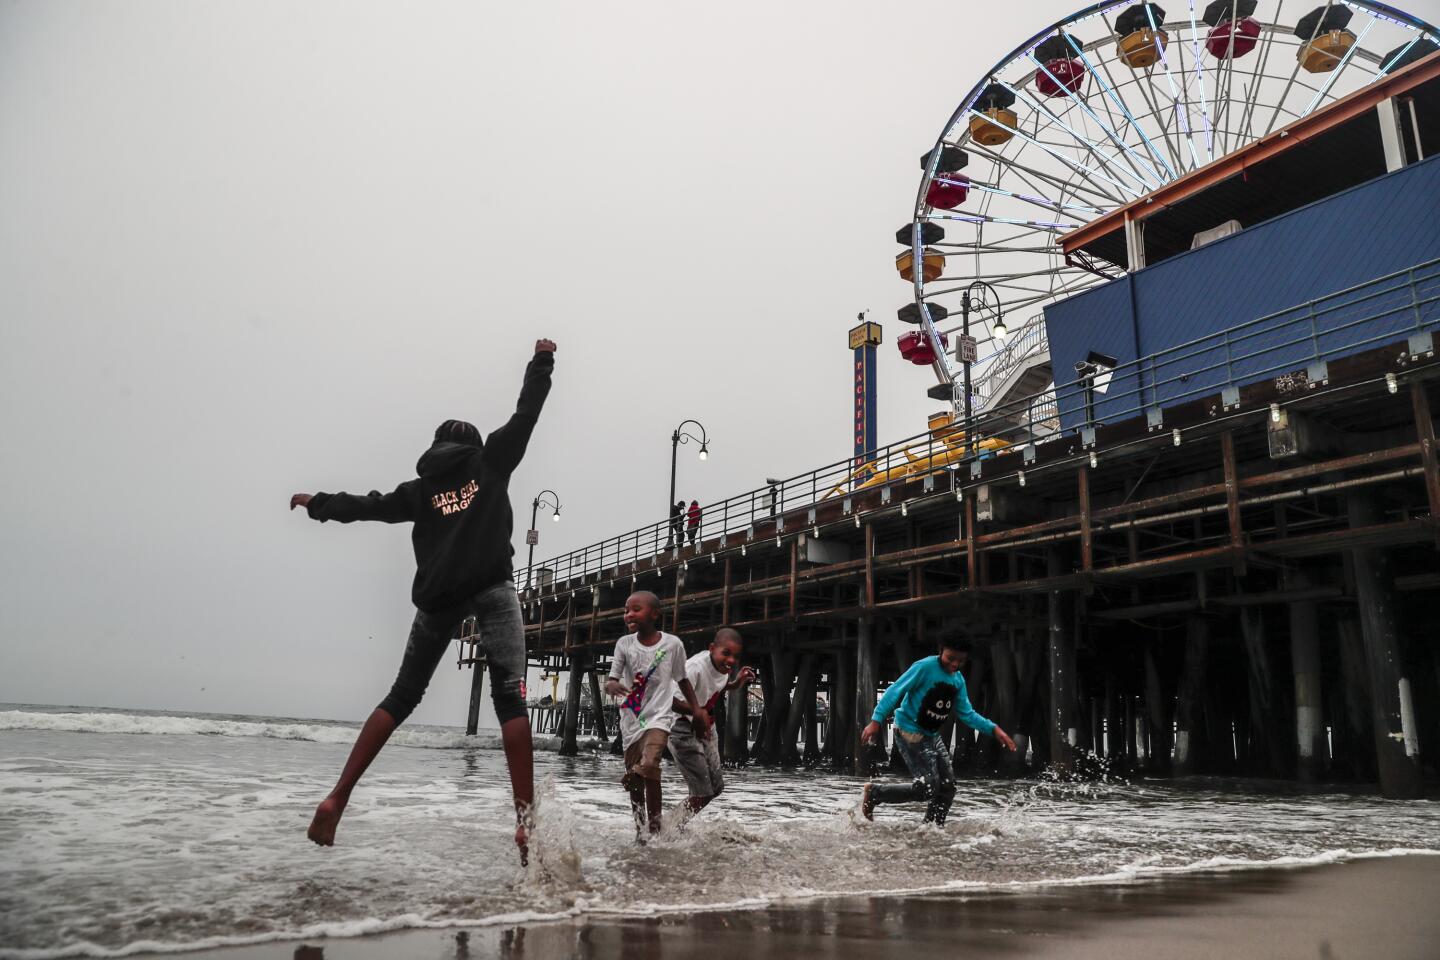 The sky is gray over the Santa Monica Pier as a family plays in the breakwater.